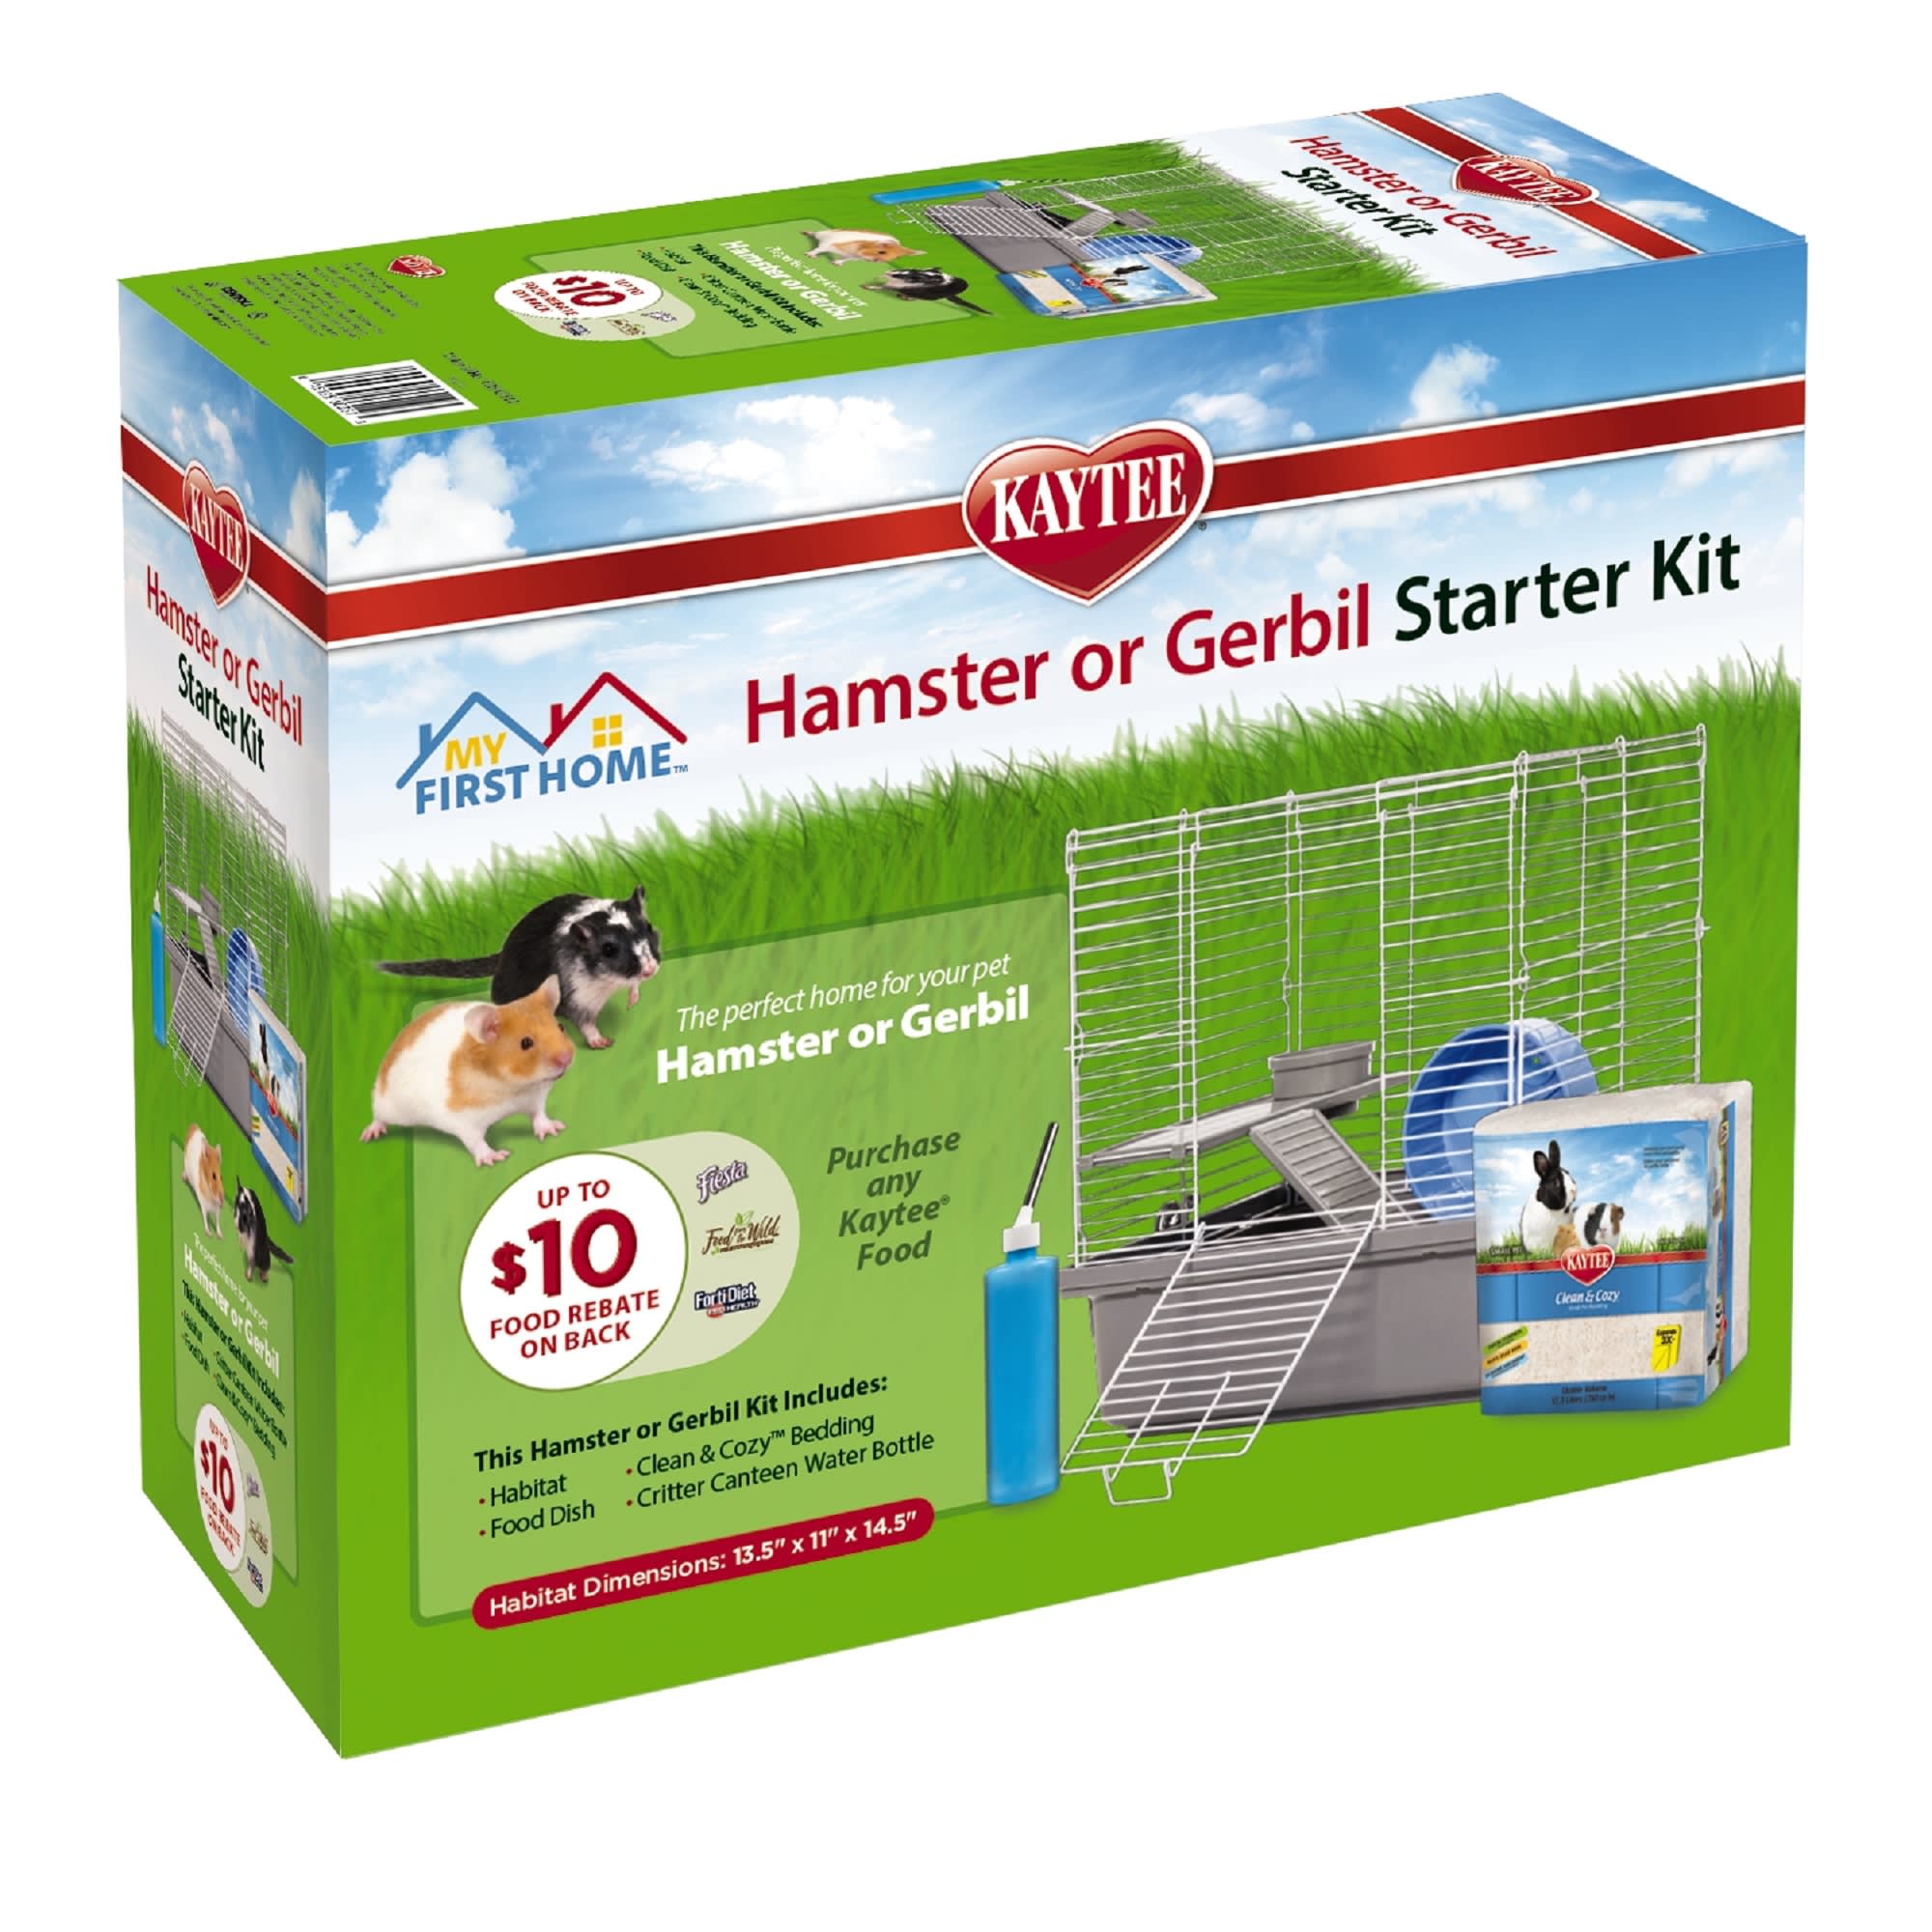 Photos - Rodent Cage / House Kaytee My First Home Hamster or Gerbil Starter Kit, 13.5" L X 11" W 